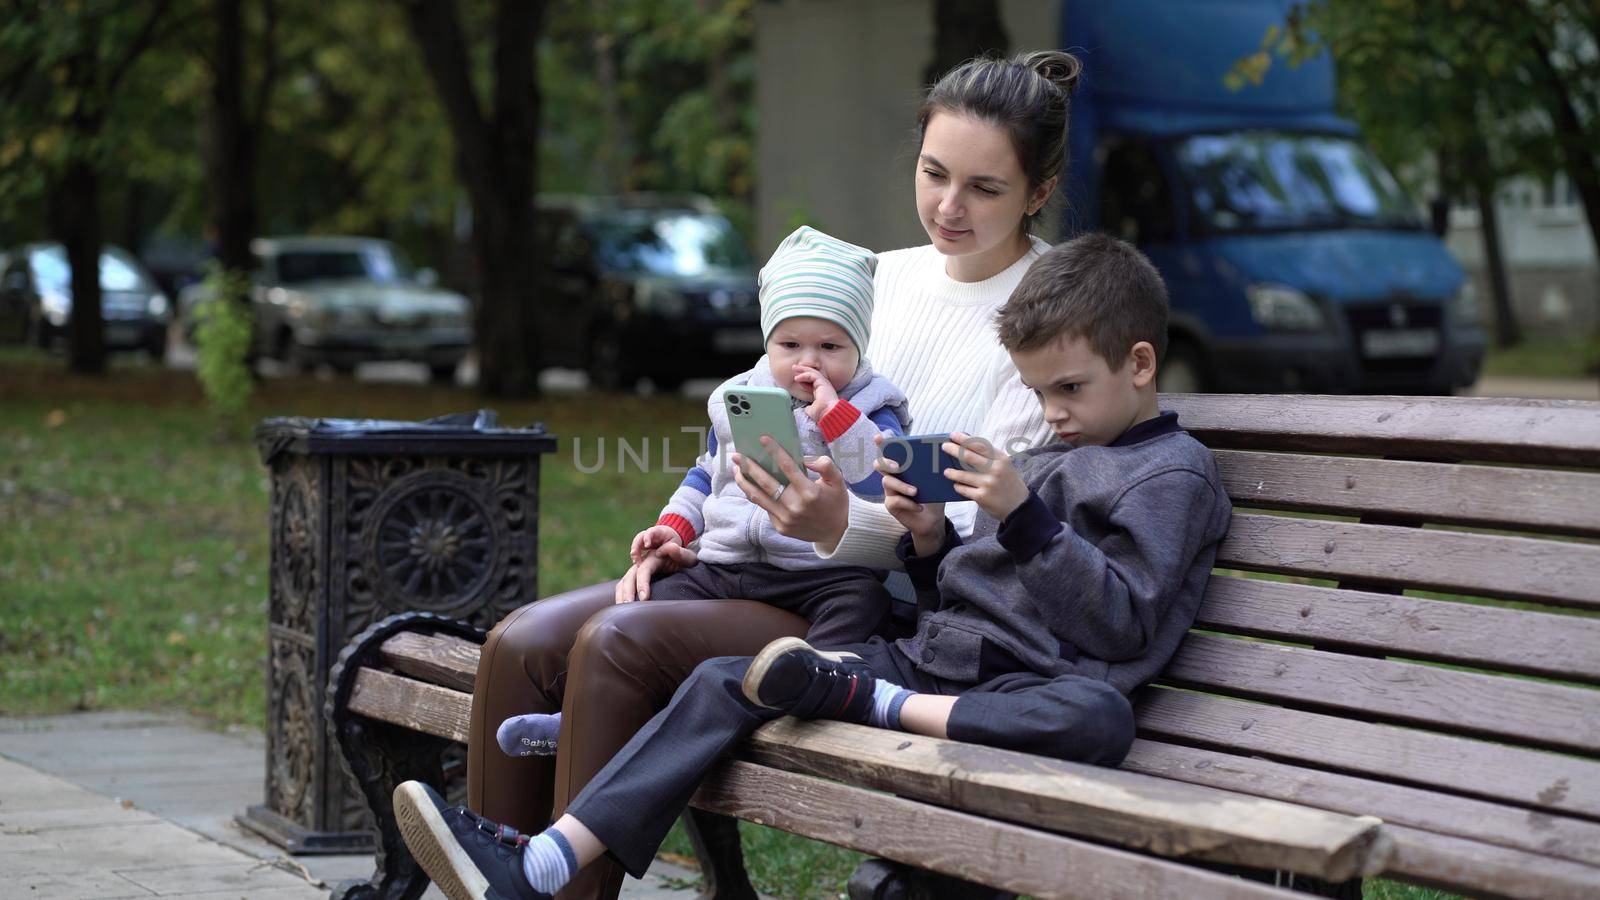 Modern family relaxing with gadgets outdoors on a bench outside. Mom and two sons in the park by Petrokill